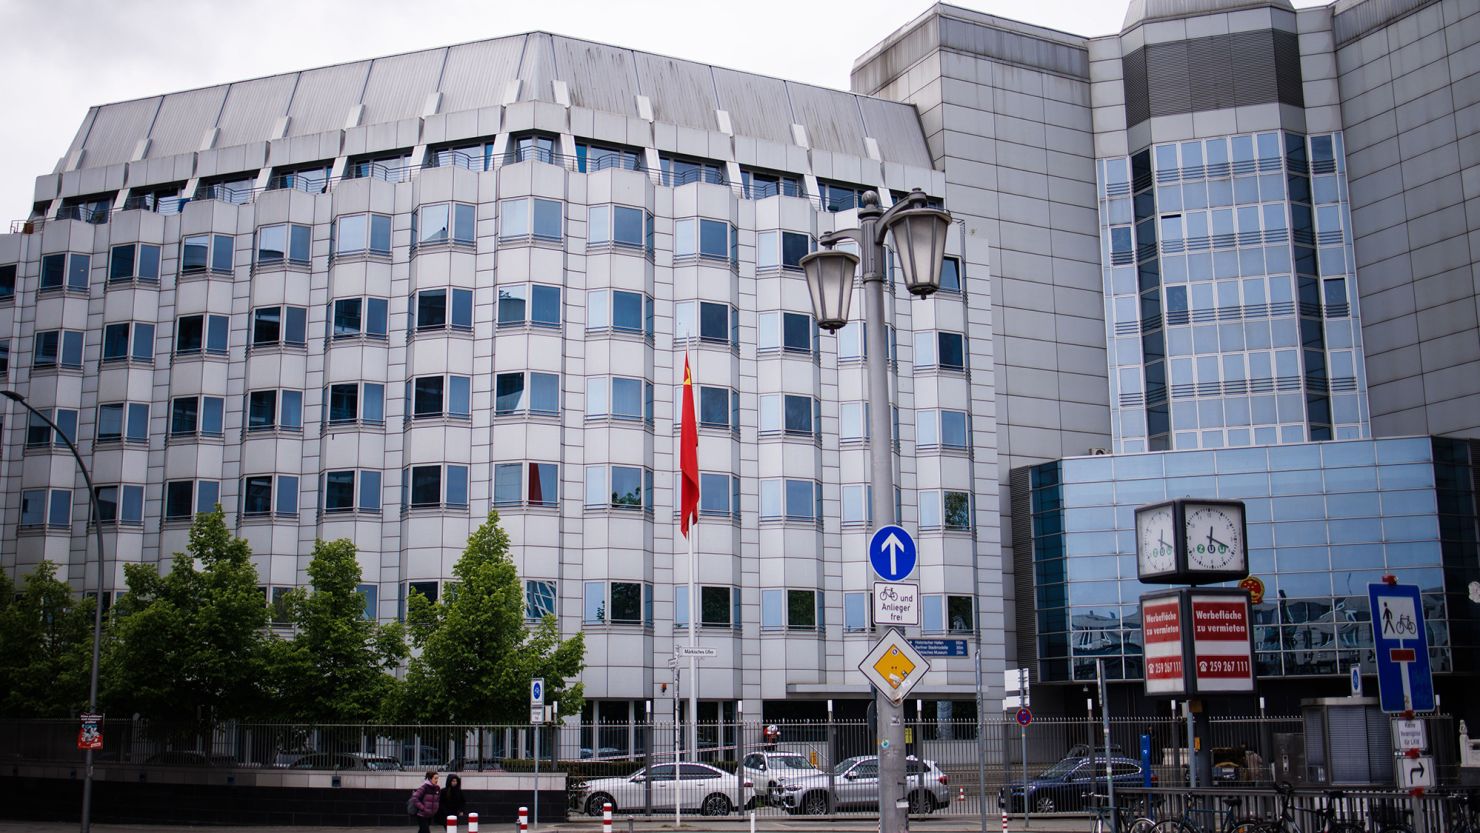 The German Federal Public Prosecutor announced that three people were arrested under suspicion of spying for China.